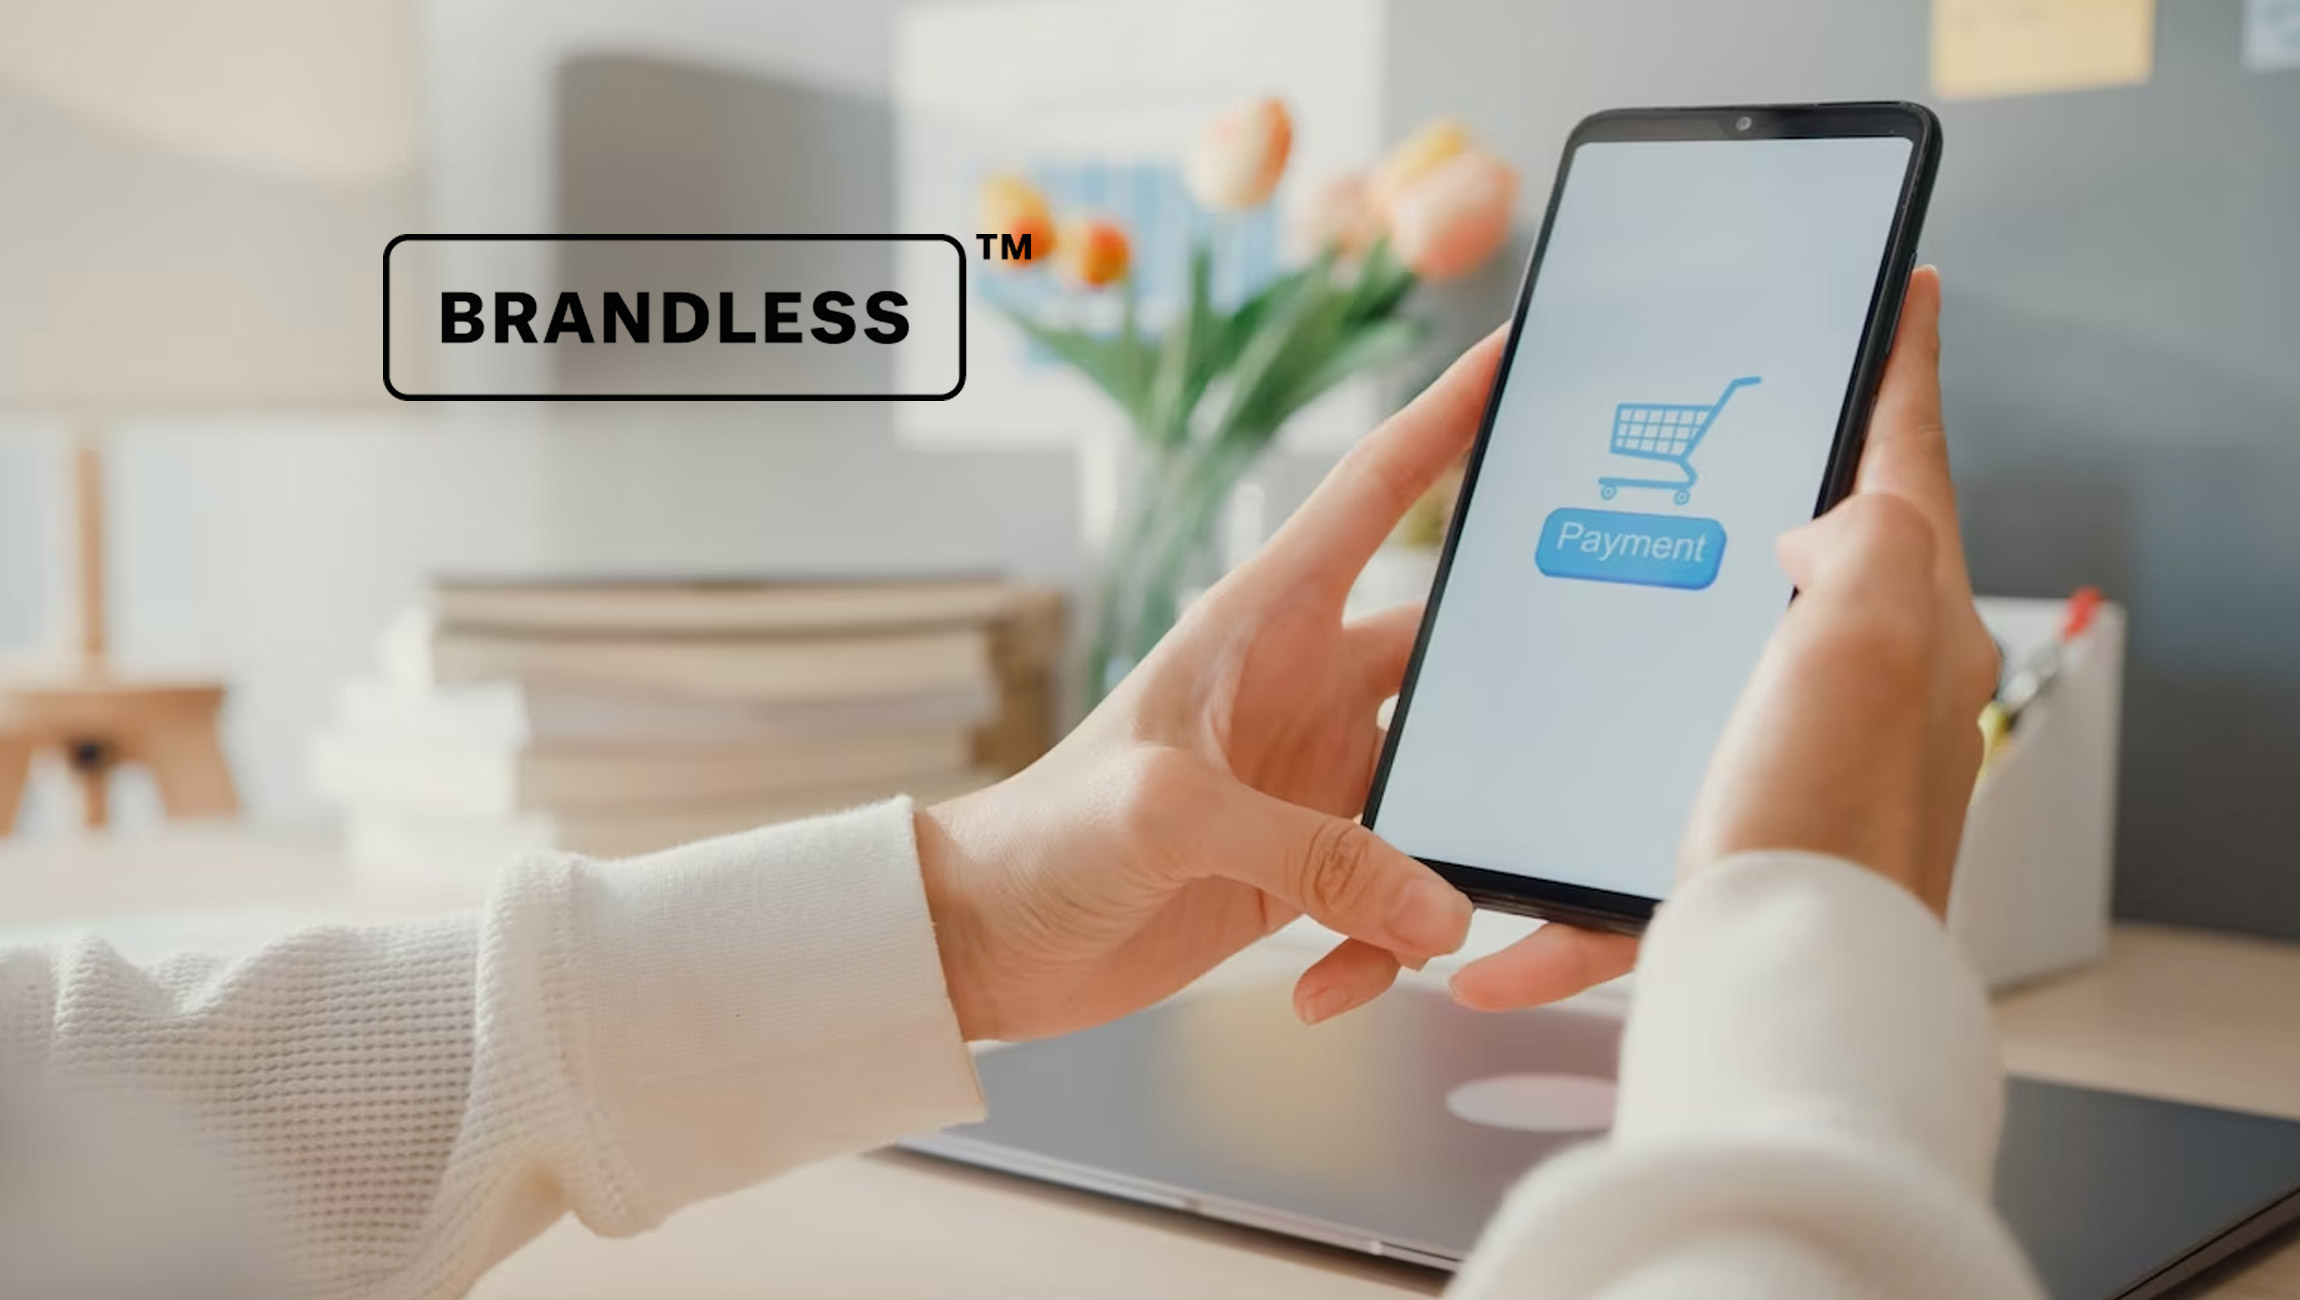 Brandless Makes the List of Top Ecommerce Startups in 2023